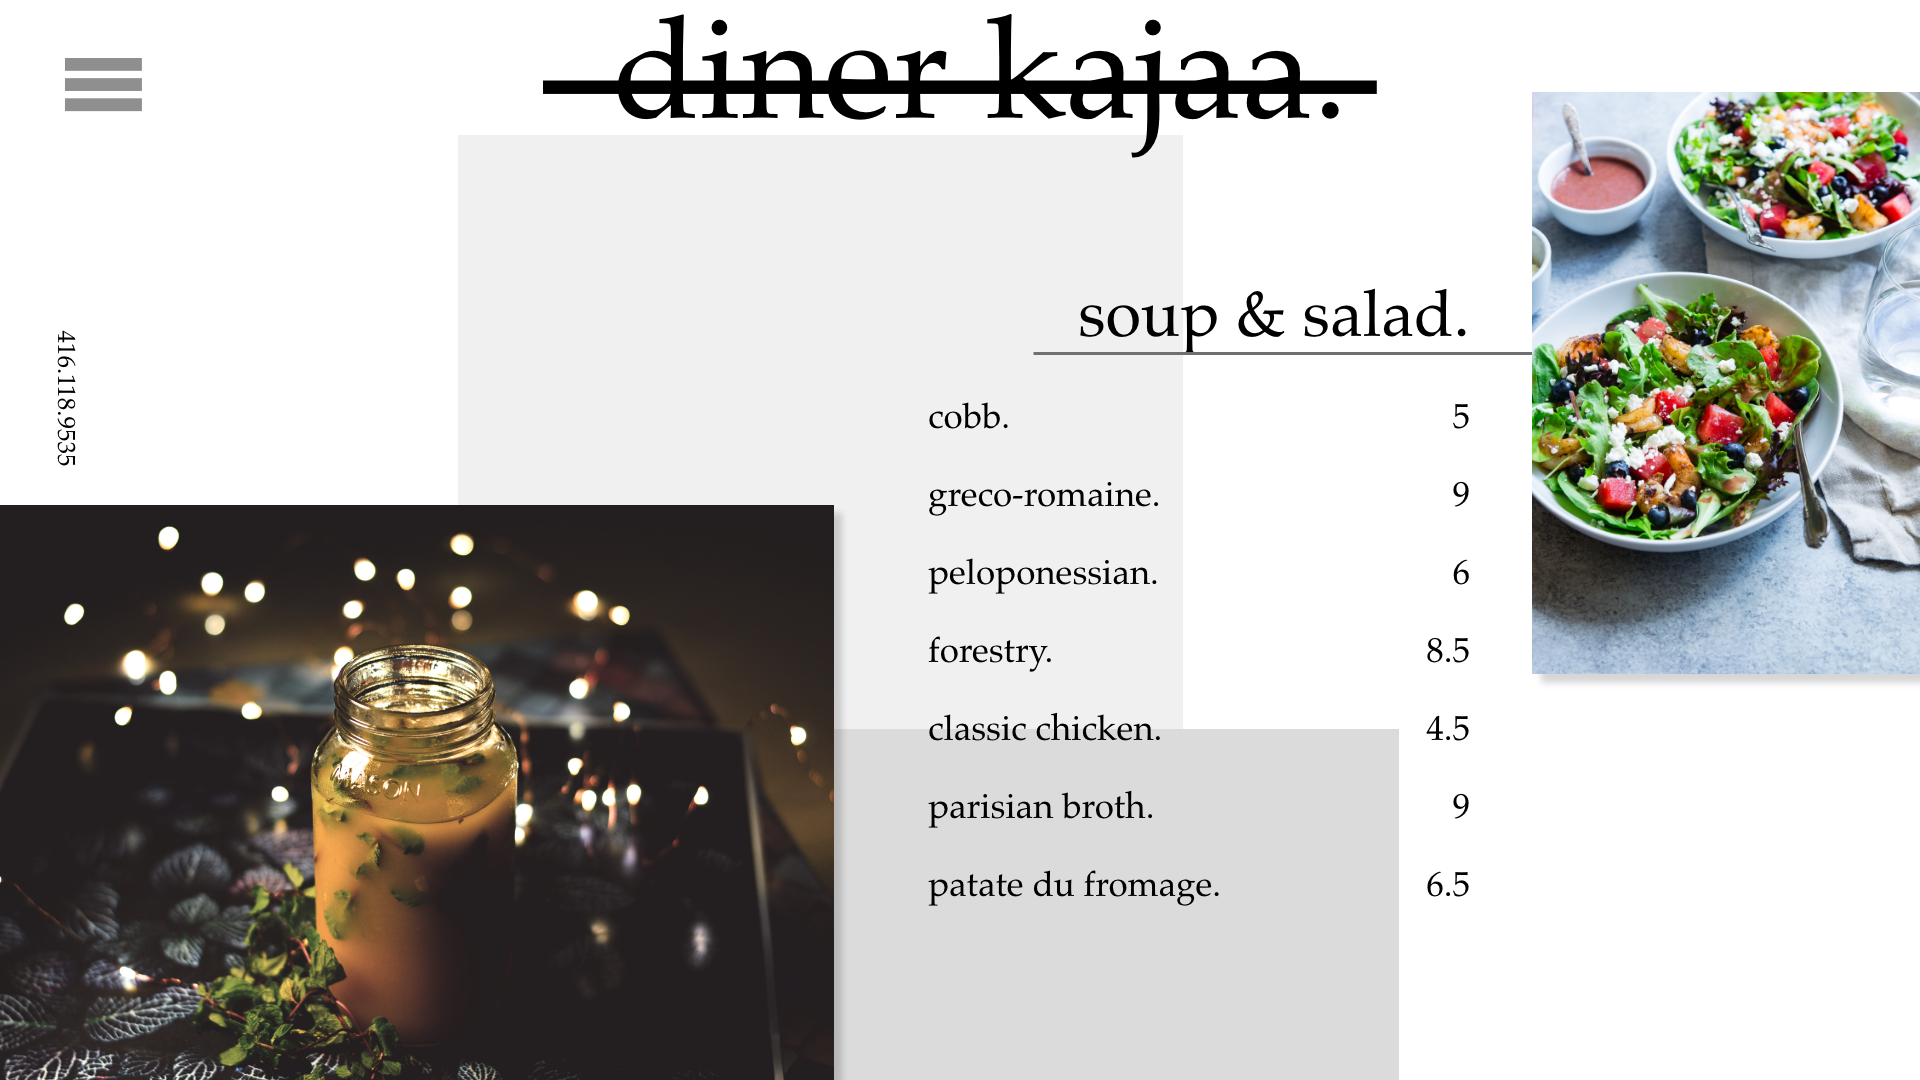 soups and salads of of diner kajaa.